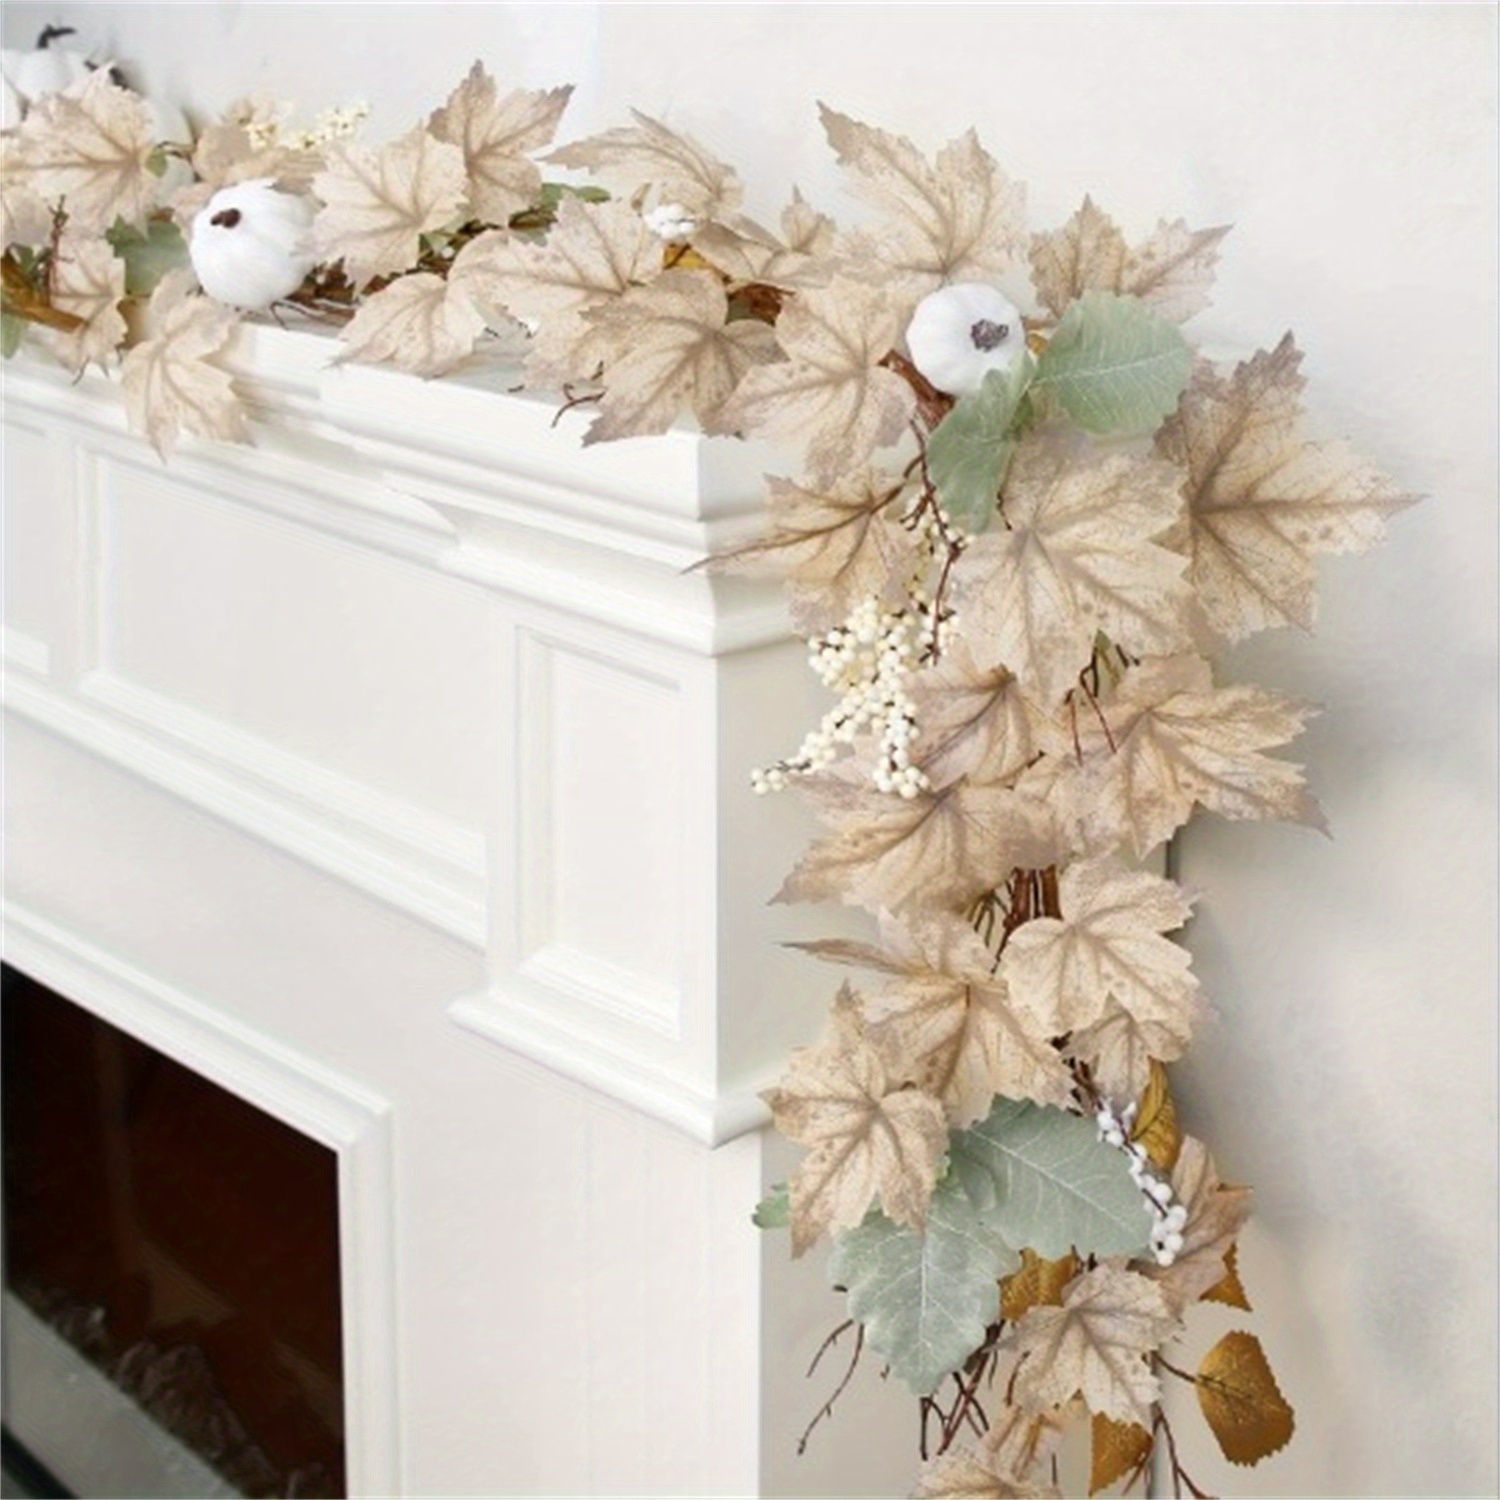 

1pc Fall Garland Maple Leaf, 6ft/piece Hanging Vine Garland Artificial Autumn Foliage Garland Thanksgiving Decor For Home Wedding Fireplace Party Christmas